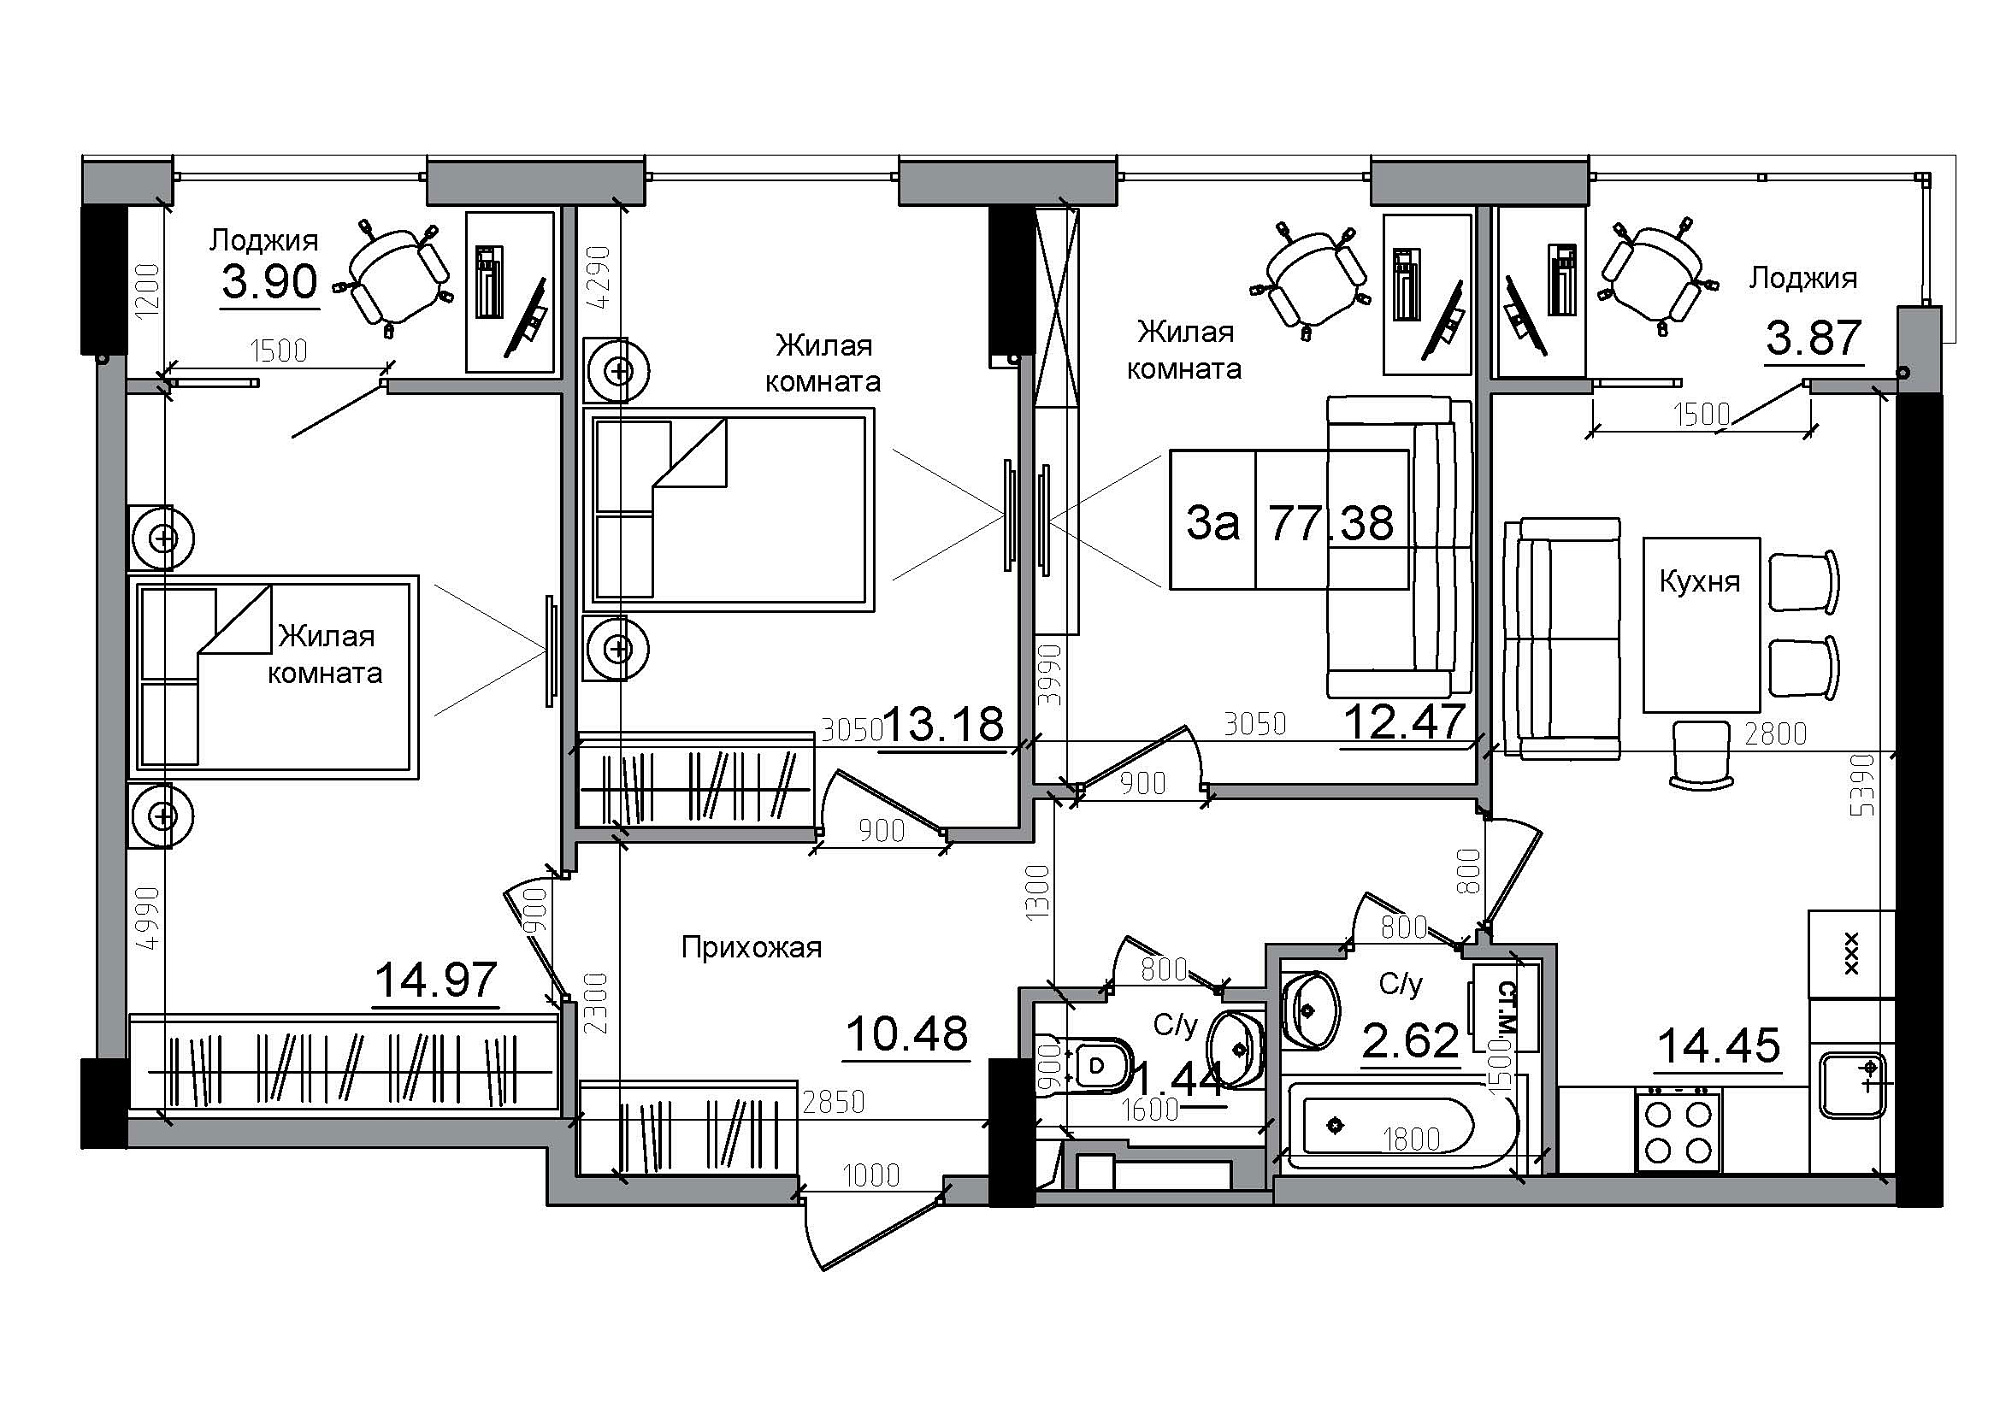 Planning 3-rm flats area 77.38m2, AB-12-03/00010.